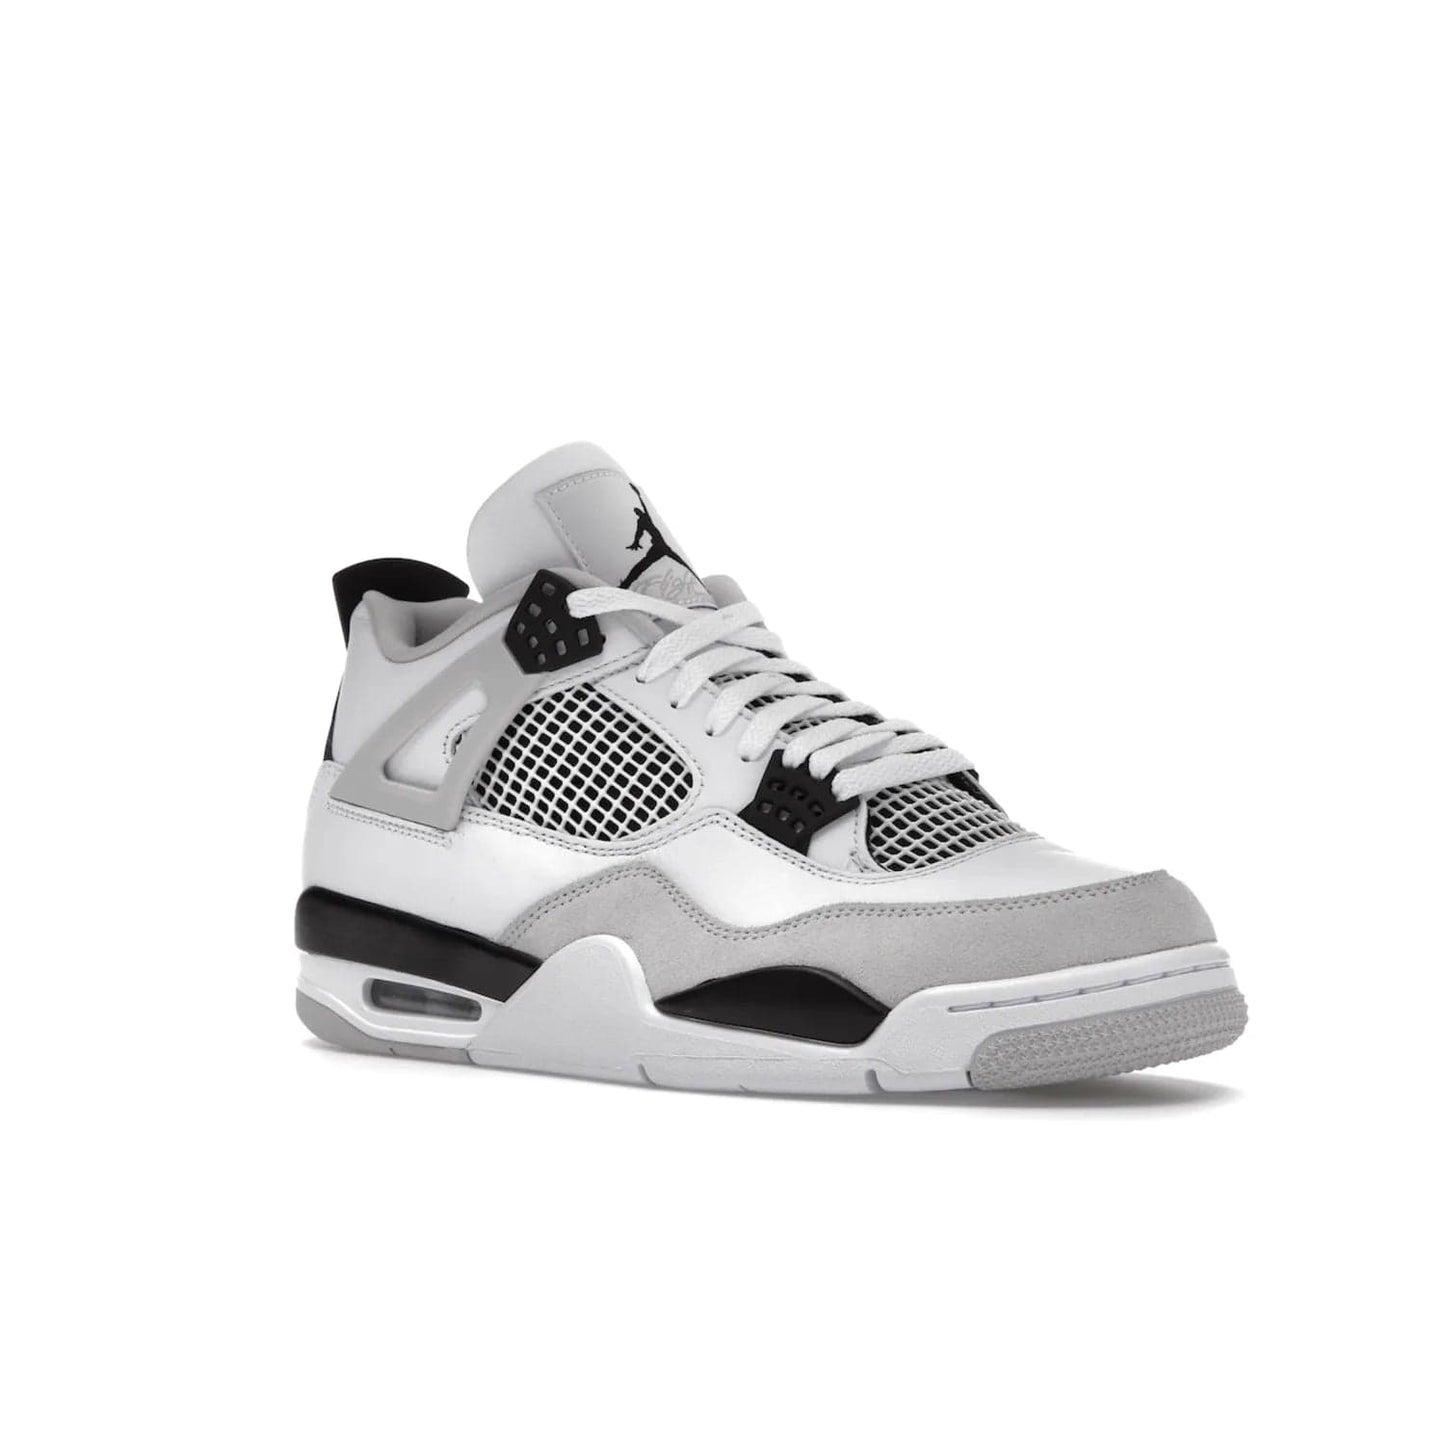 Jordan 4 Retro Military Black - Image 5 - Only at www.BallersClubKickz.com - Updated Air Jordan 4 style with a white/black/light grey sole and visible Air unit. Released in May 2022, offering timeless classic style and comfort.